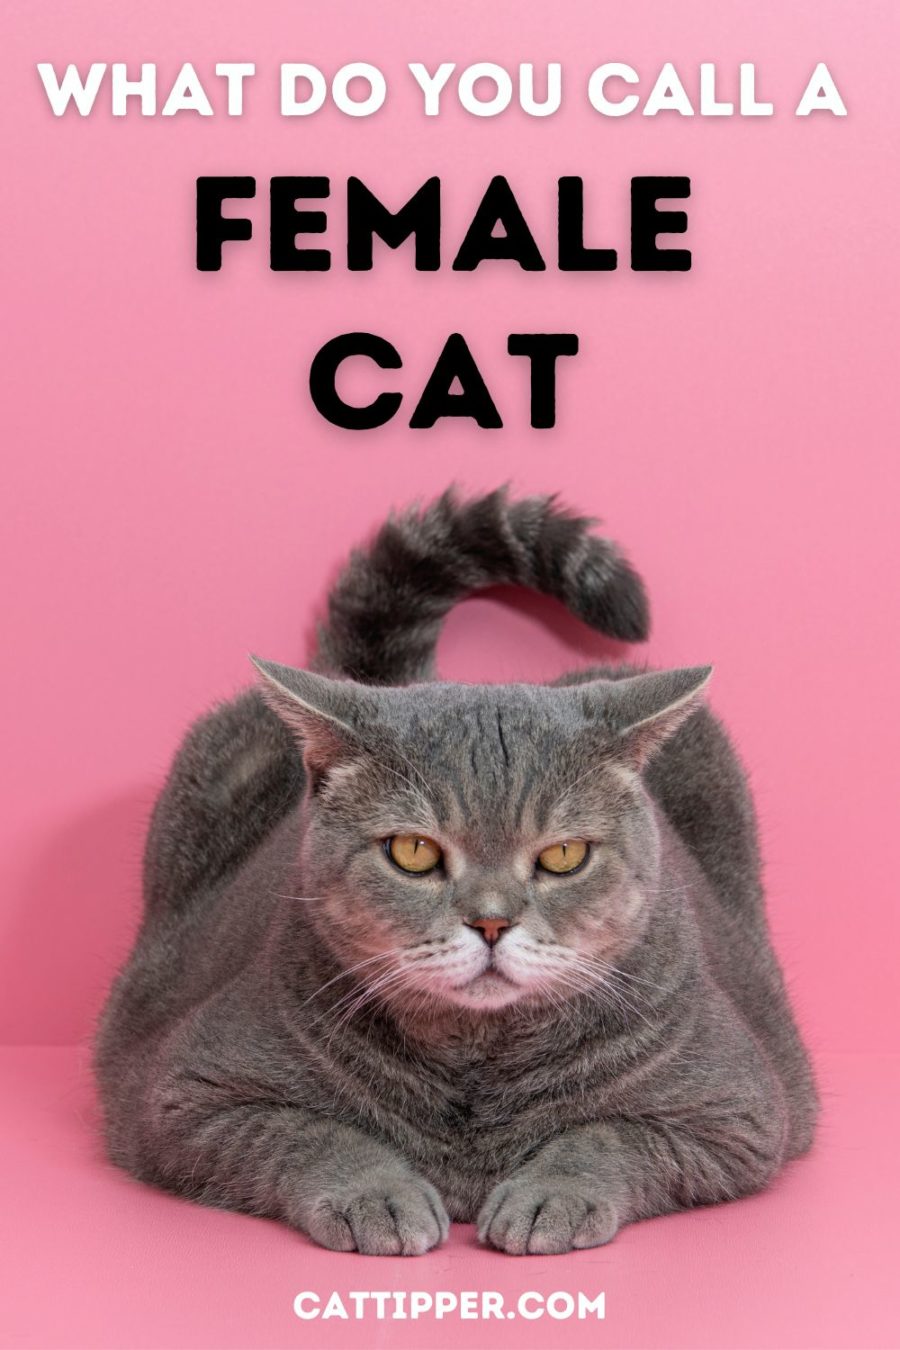 What do you call a female cat?